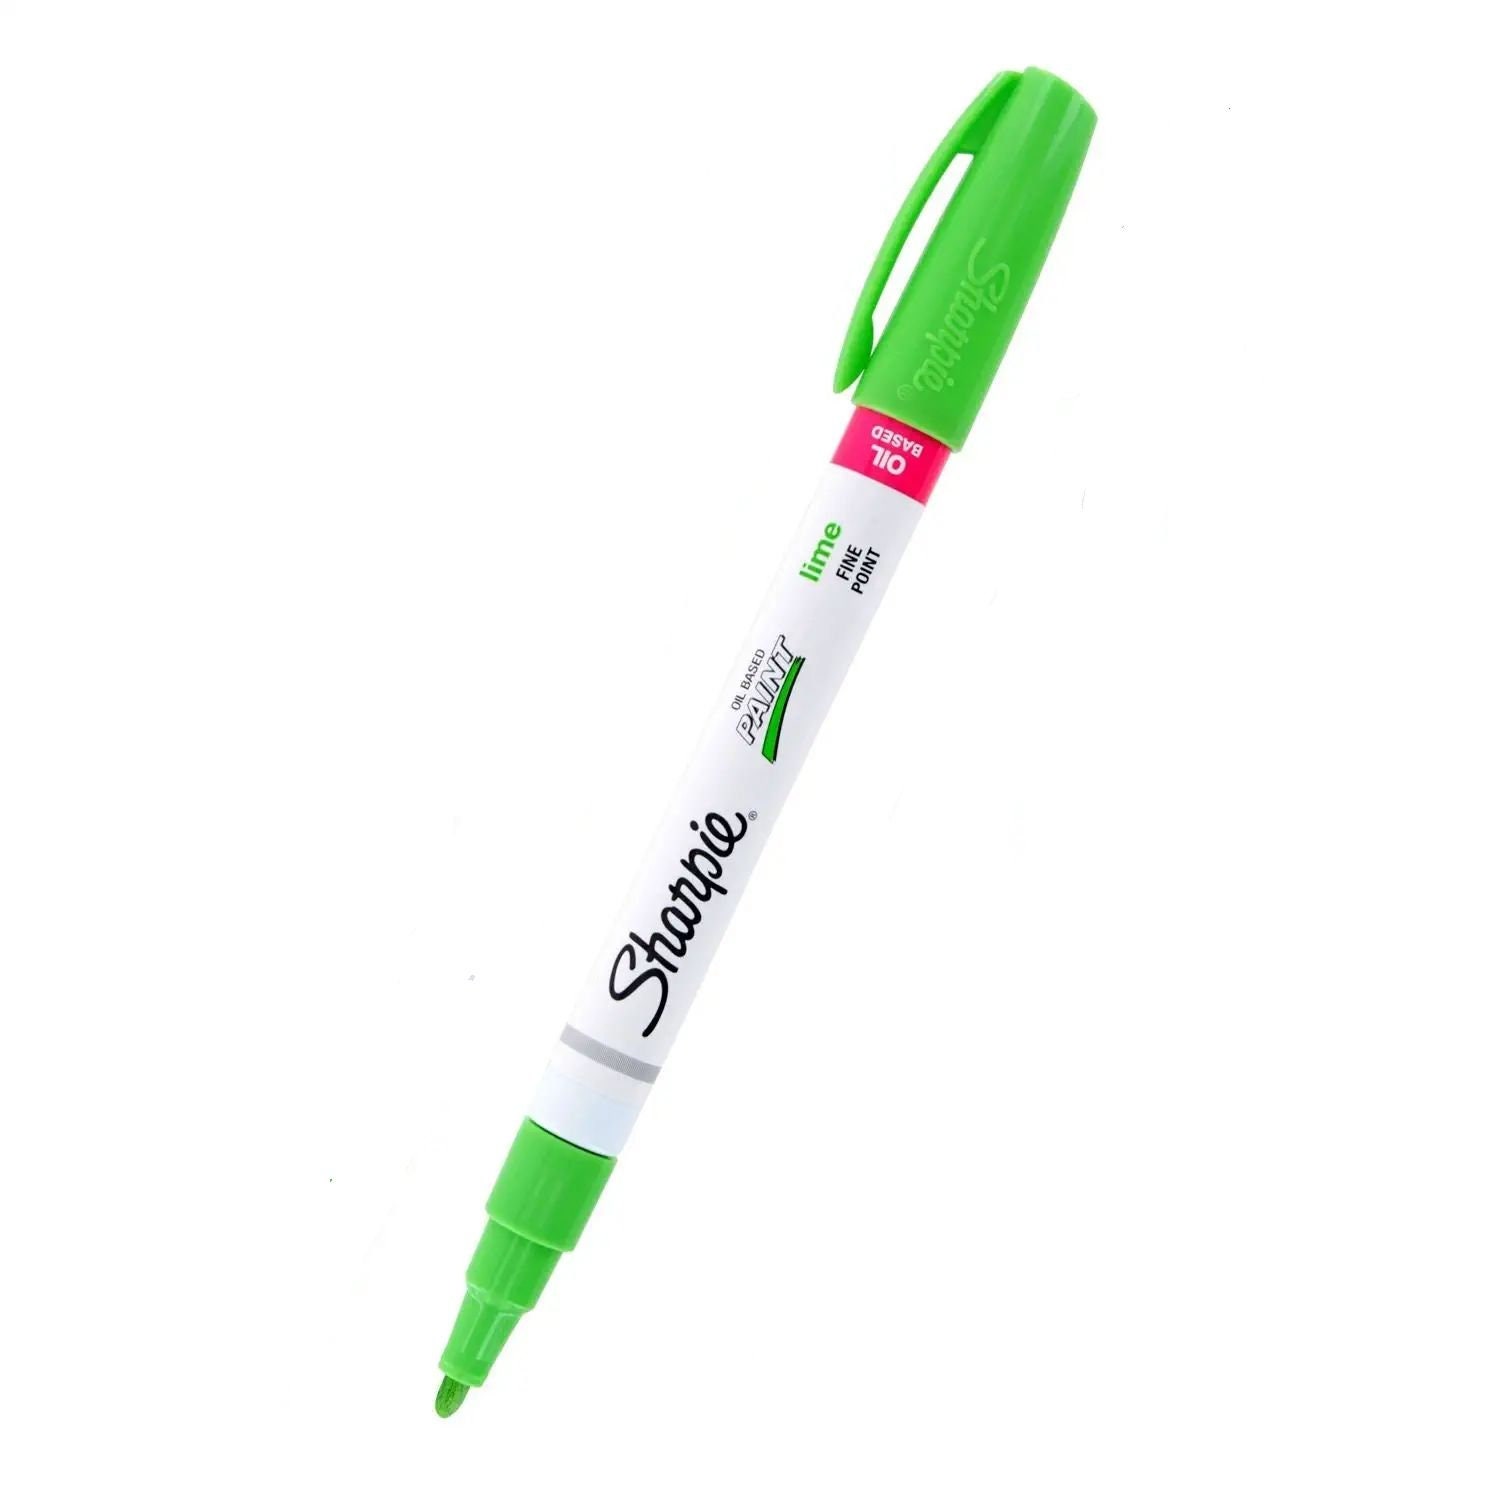  Sharpie Oil-Based Paint Marker, Medium Point, Green Ink, Pack  of 3 : Arts, Crafts & Sewing